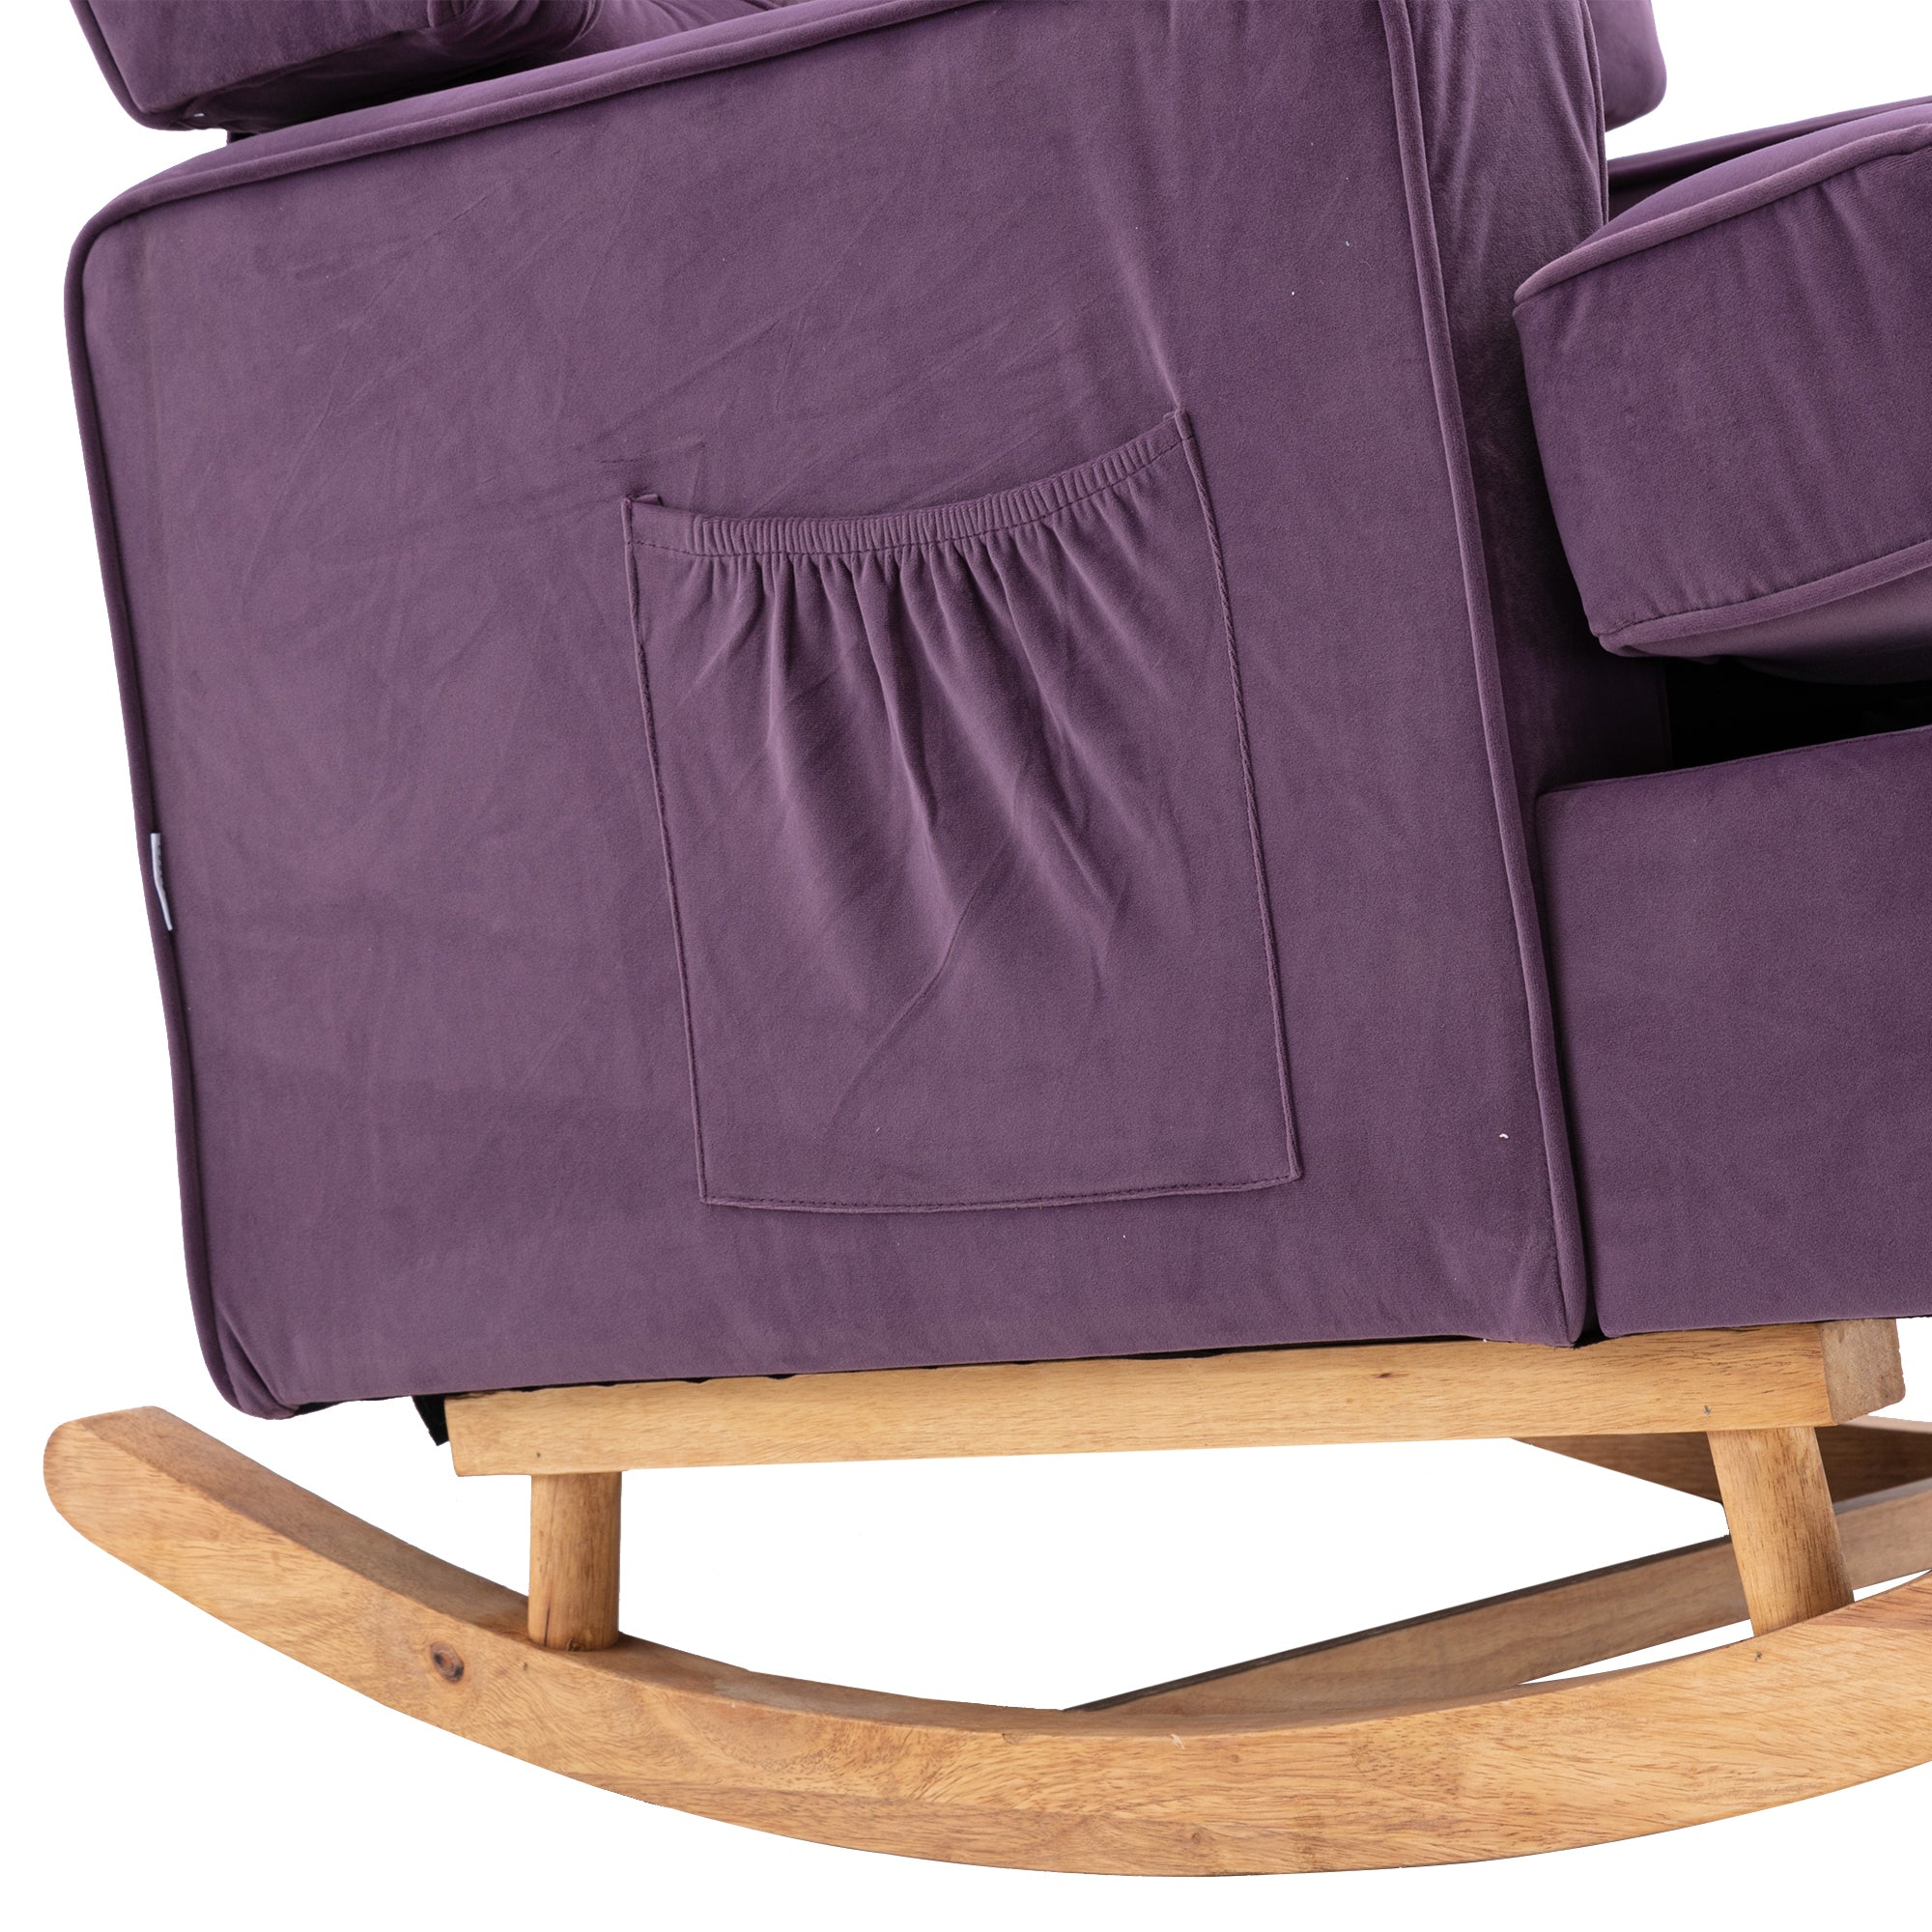 COOLMORE living room Comfortable rocking chair accent purple-polyester